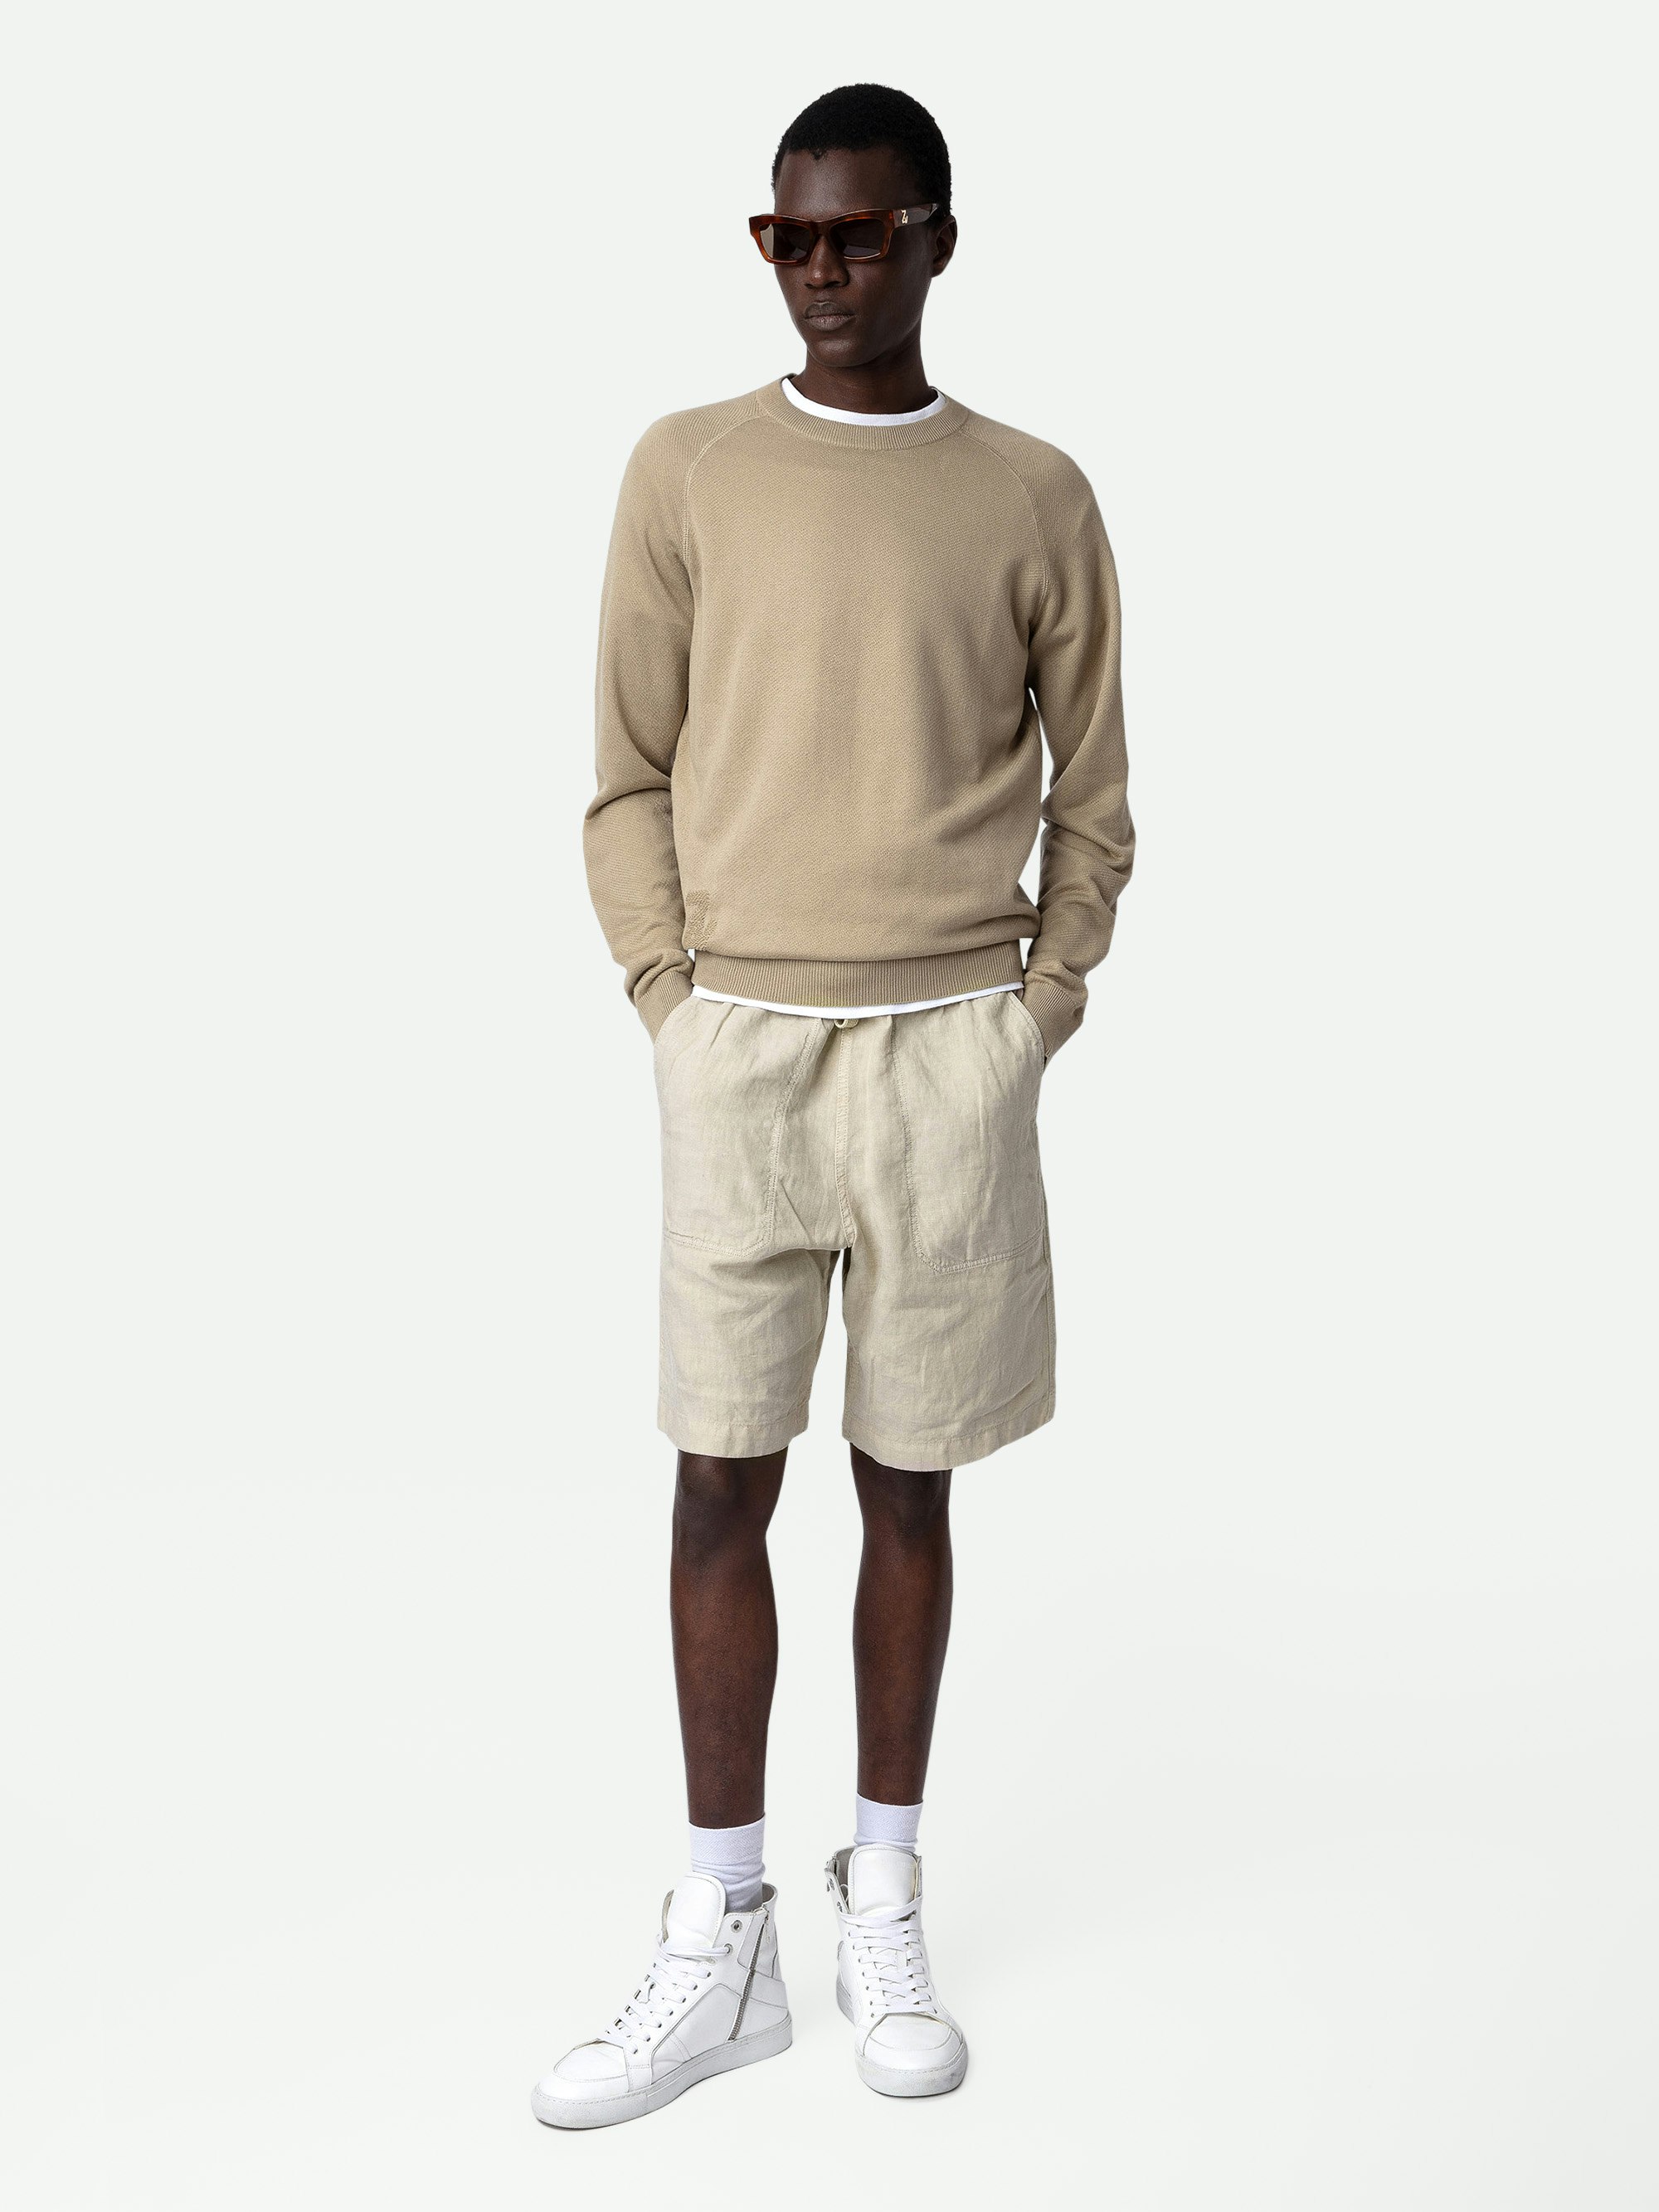 Thomaso Sweater - Men's light beige sweater with ZV embroidery.